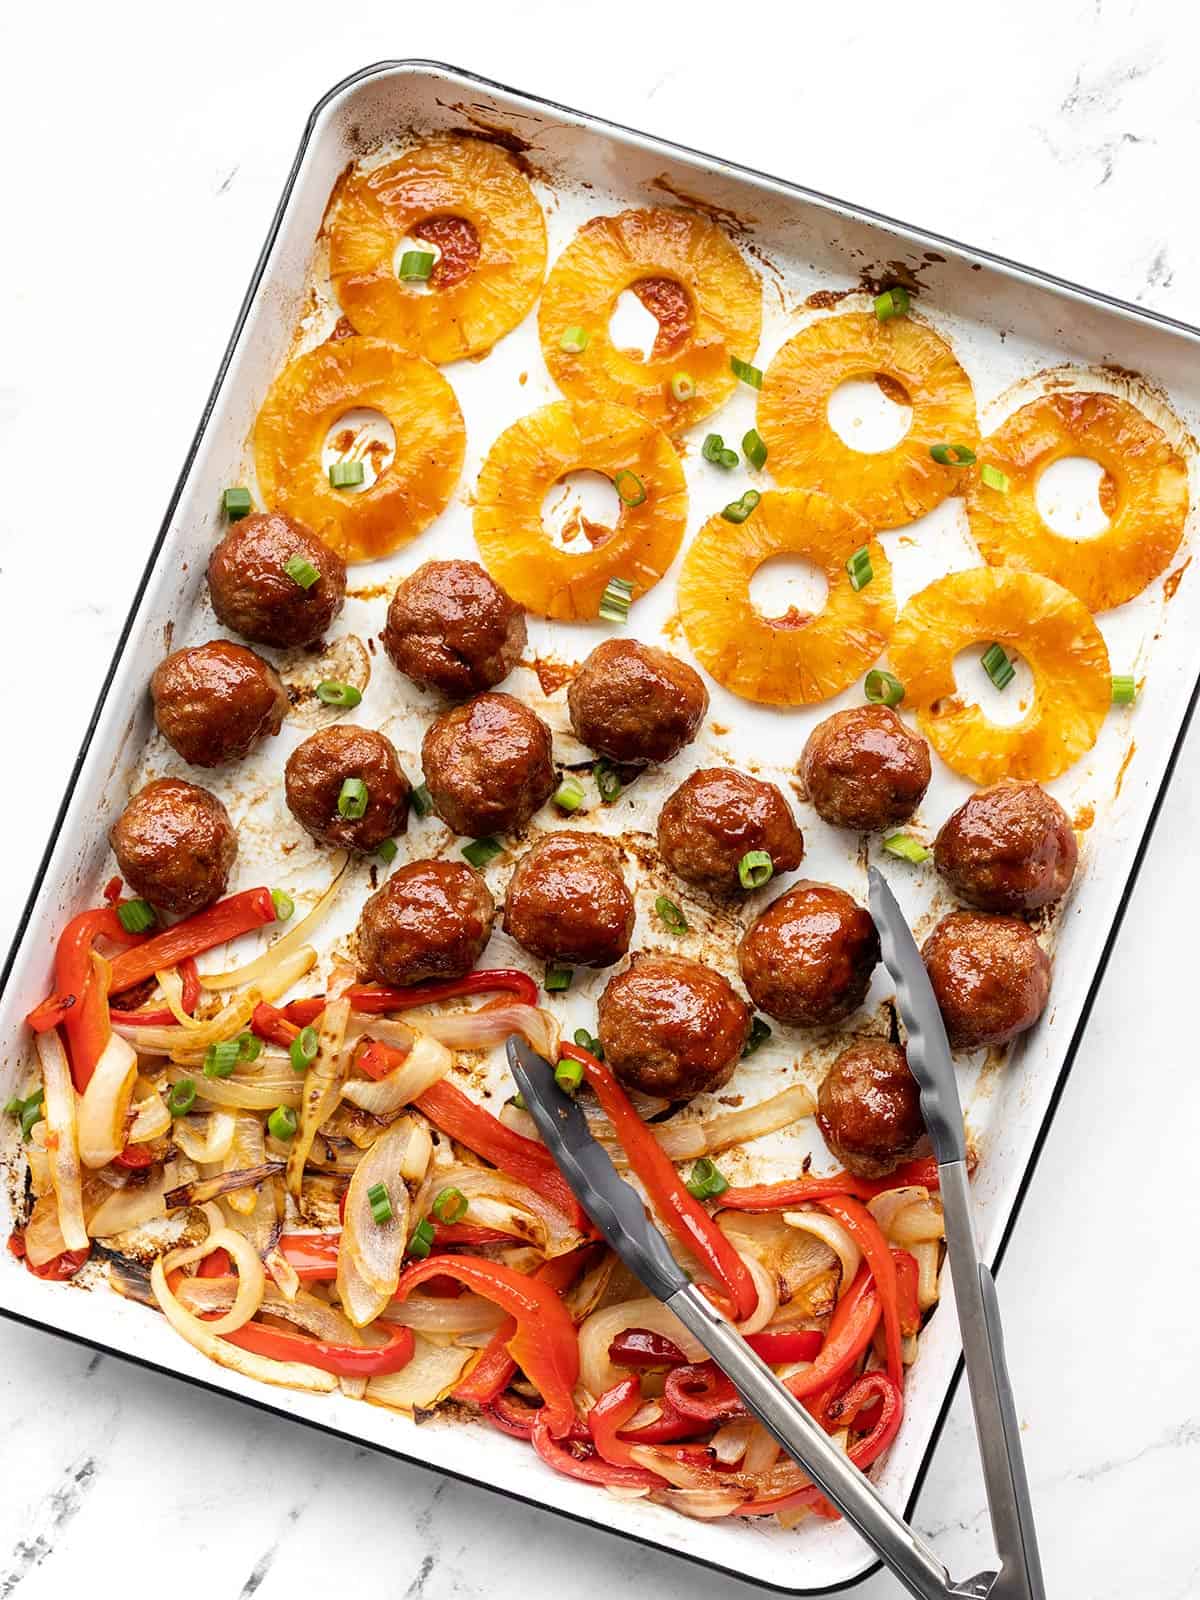 Sheet pan bbq meatballs on the pan with pineapple, peppers, and onions. Tongs resting on the side.